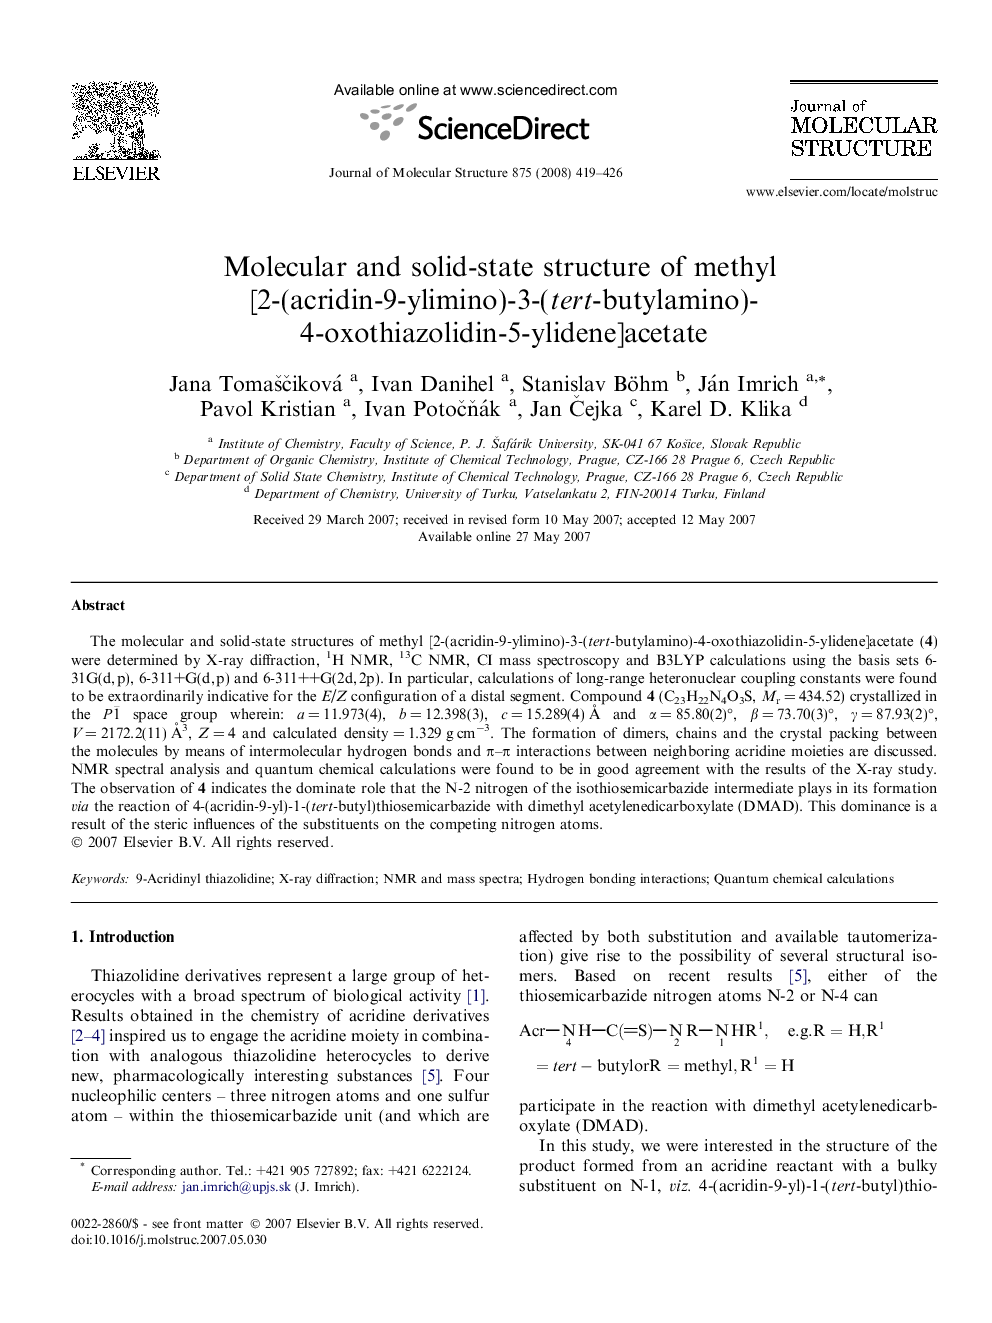 Molecular and solid-state structure of methyl [2-(acridin-9-ylimino)-3-(tert-butylamino)-4-oxothiazolidin-5-ylidene]acetate